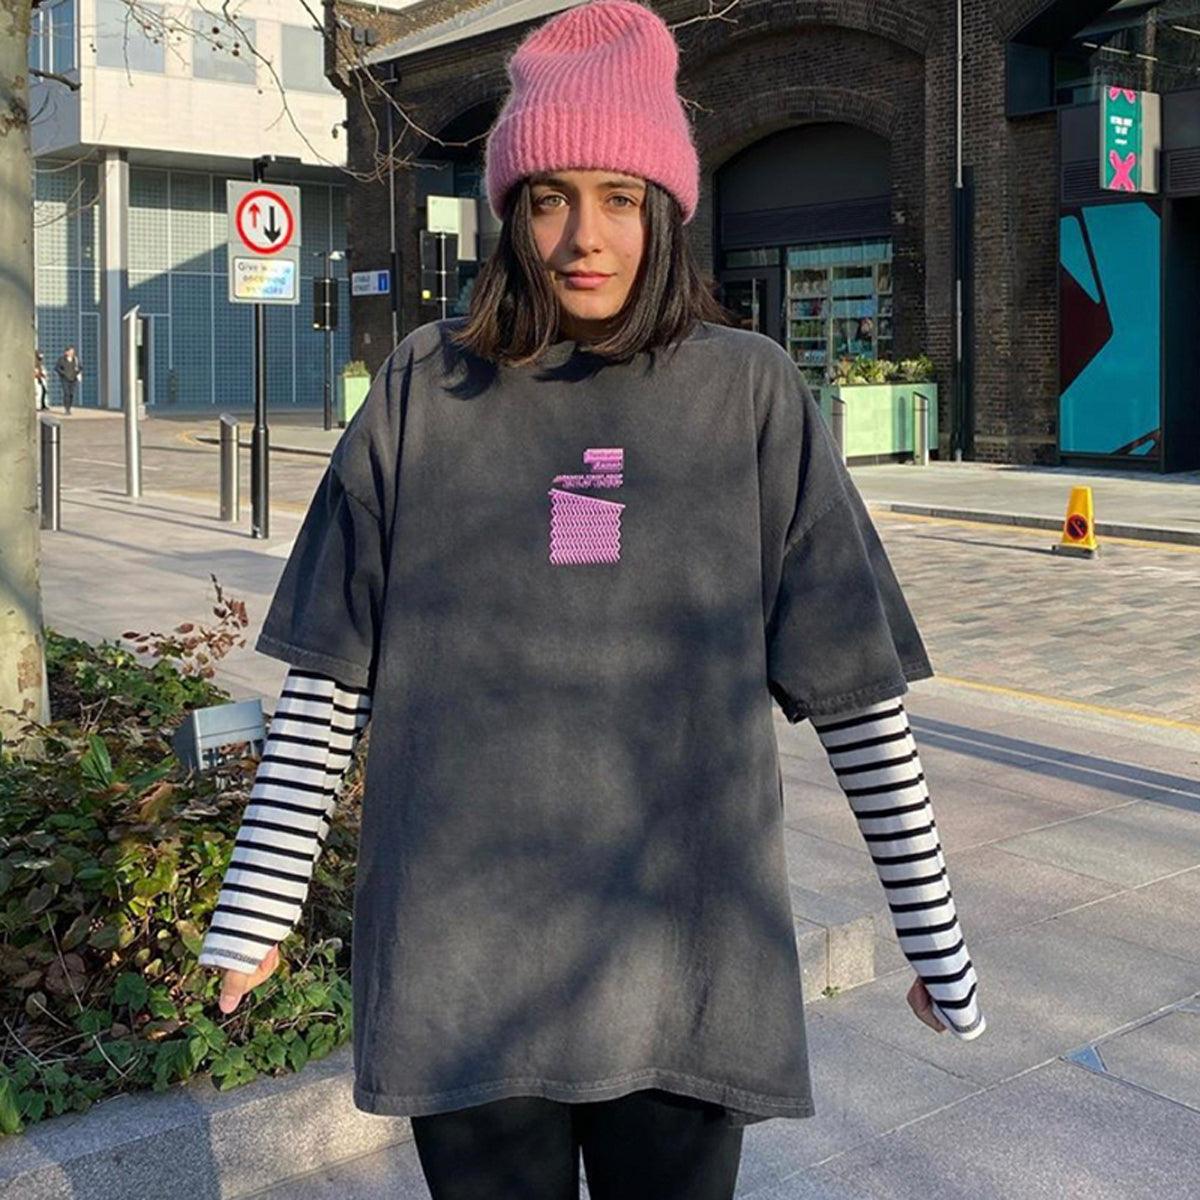 Ramen Glitch Wave Striped Sleeve Top - Aesthetic Clothes Shop